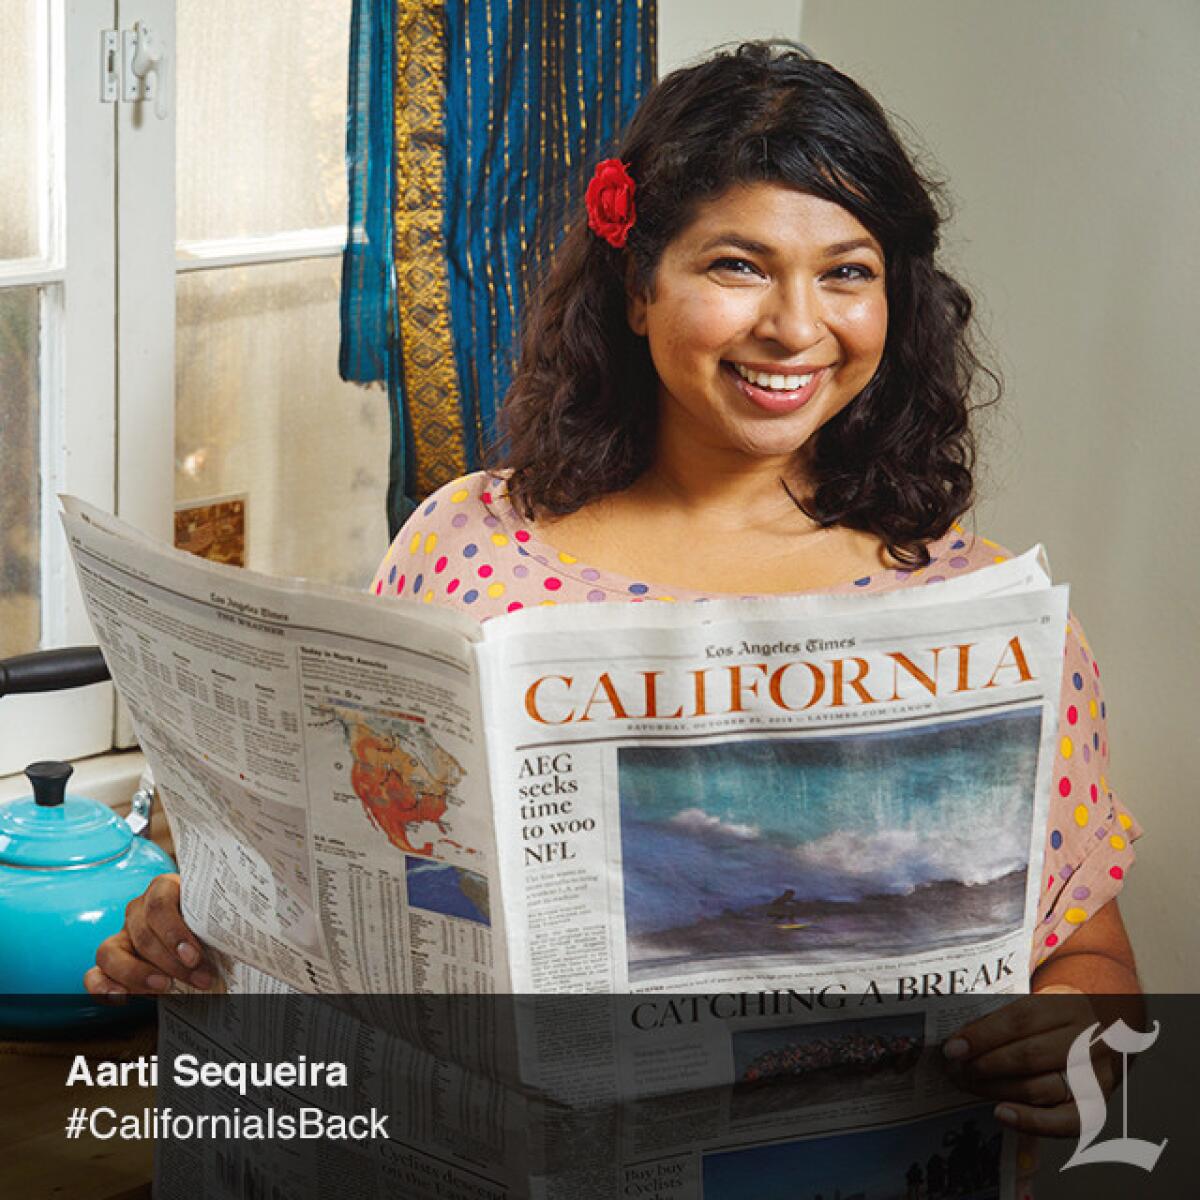 Aarti Sequeira, Chef, Cookbook Author and Host.